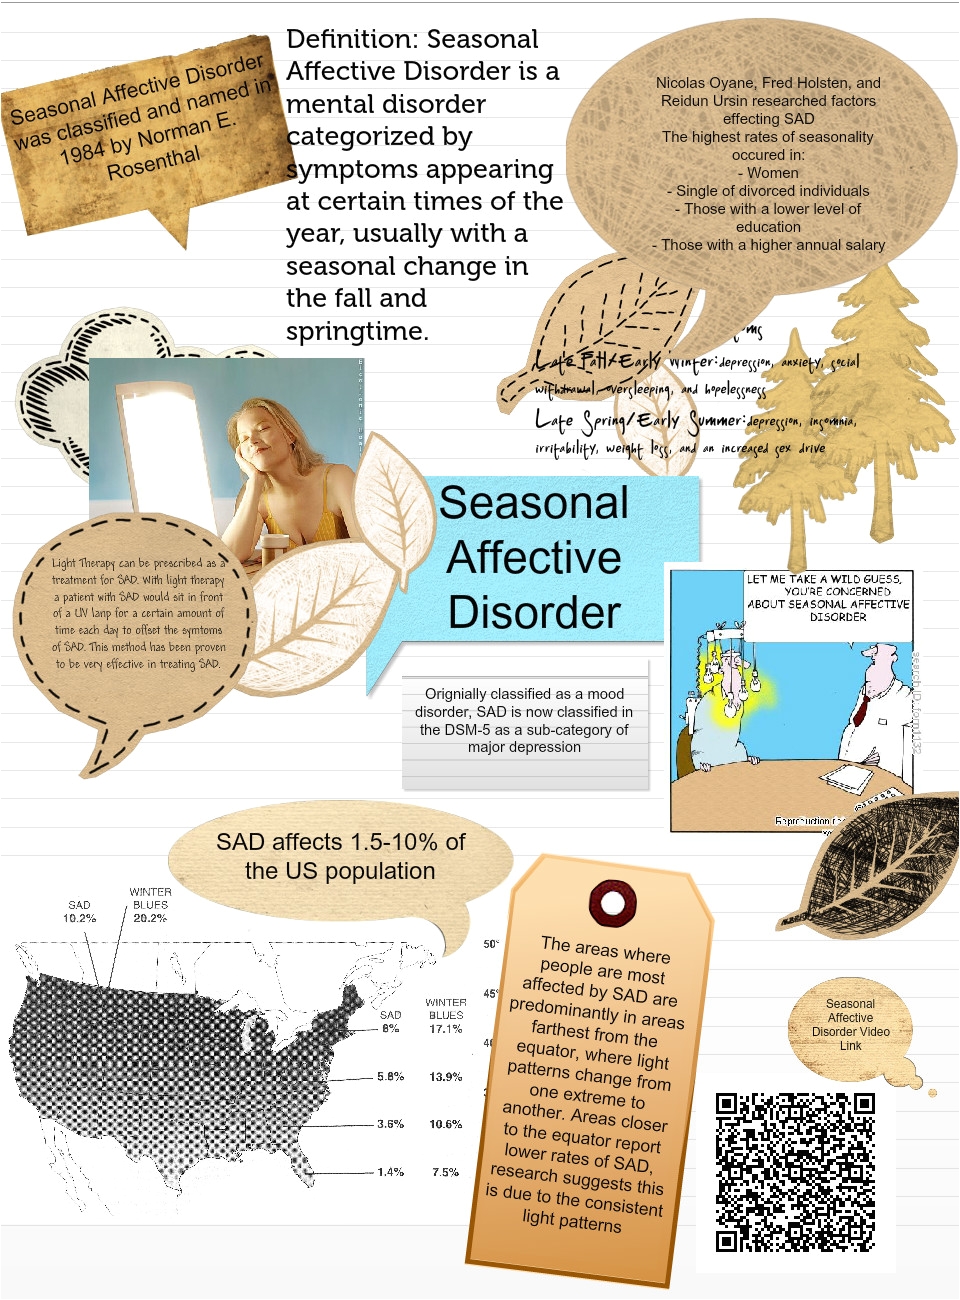 seasonal affective disorder text images music video glogster edu interactive multimedia posters